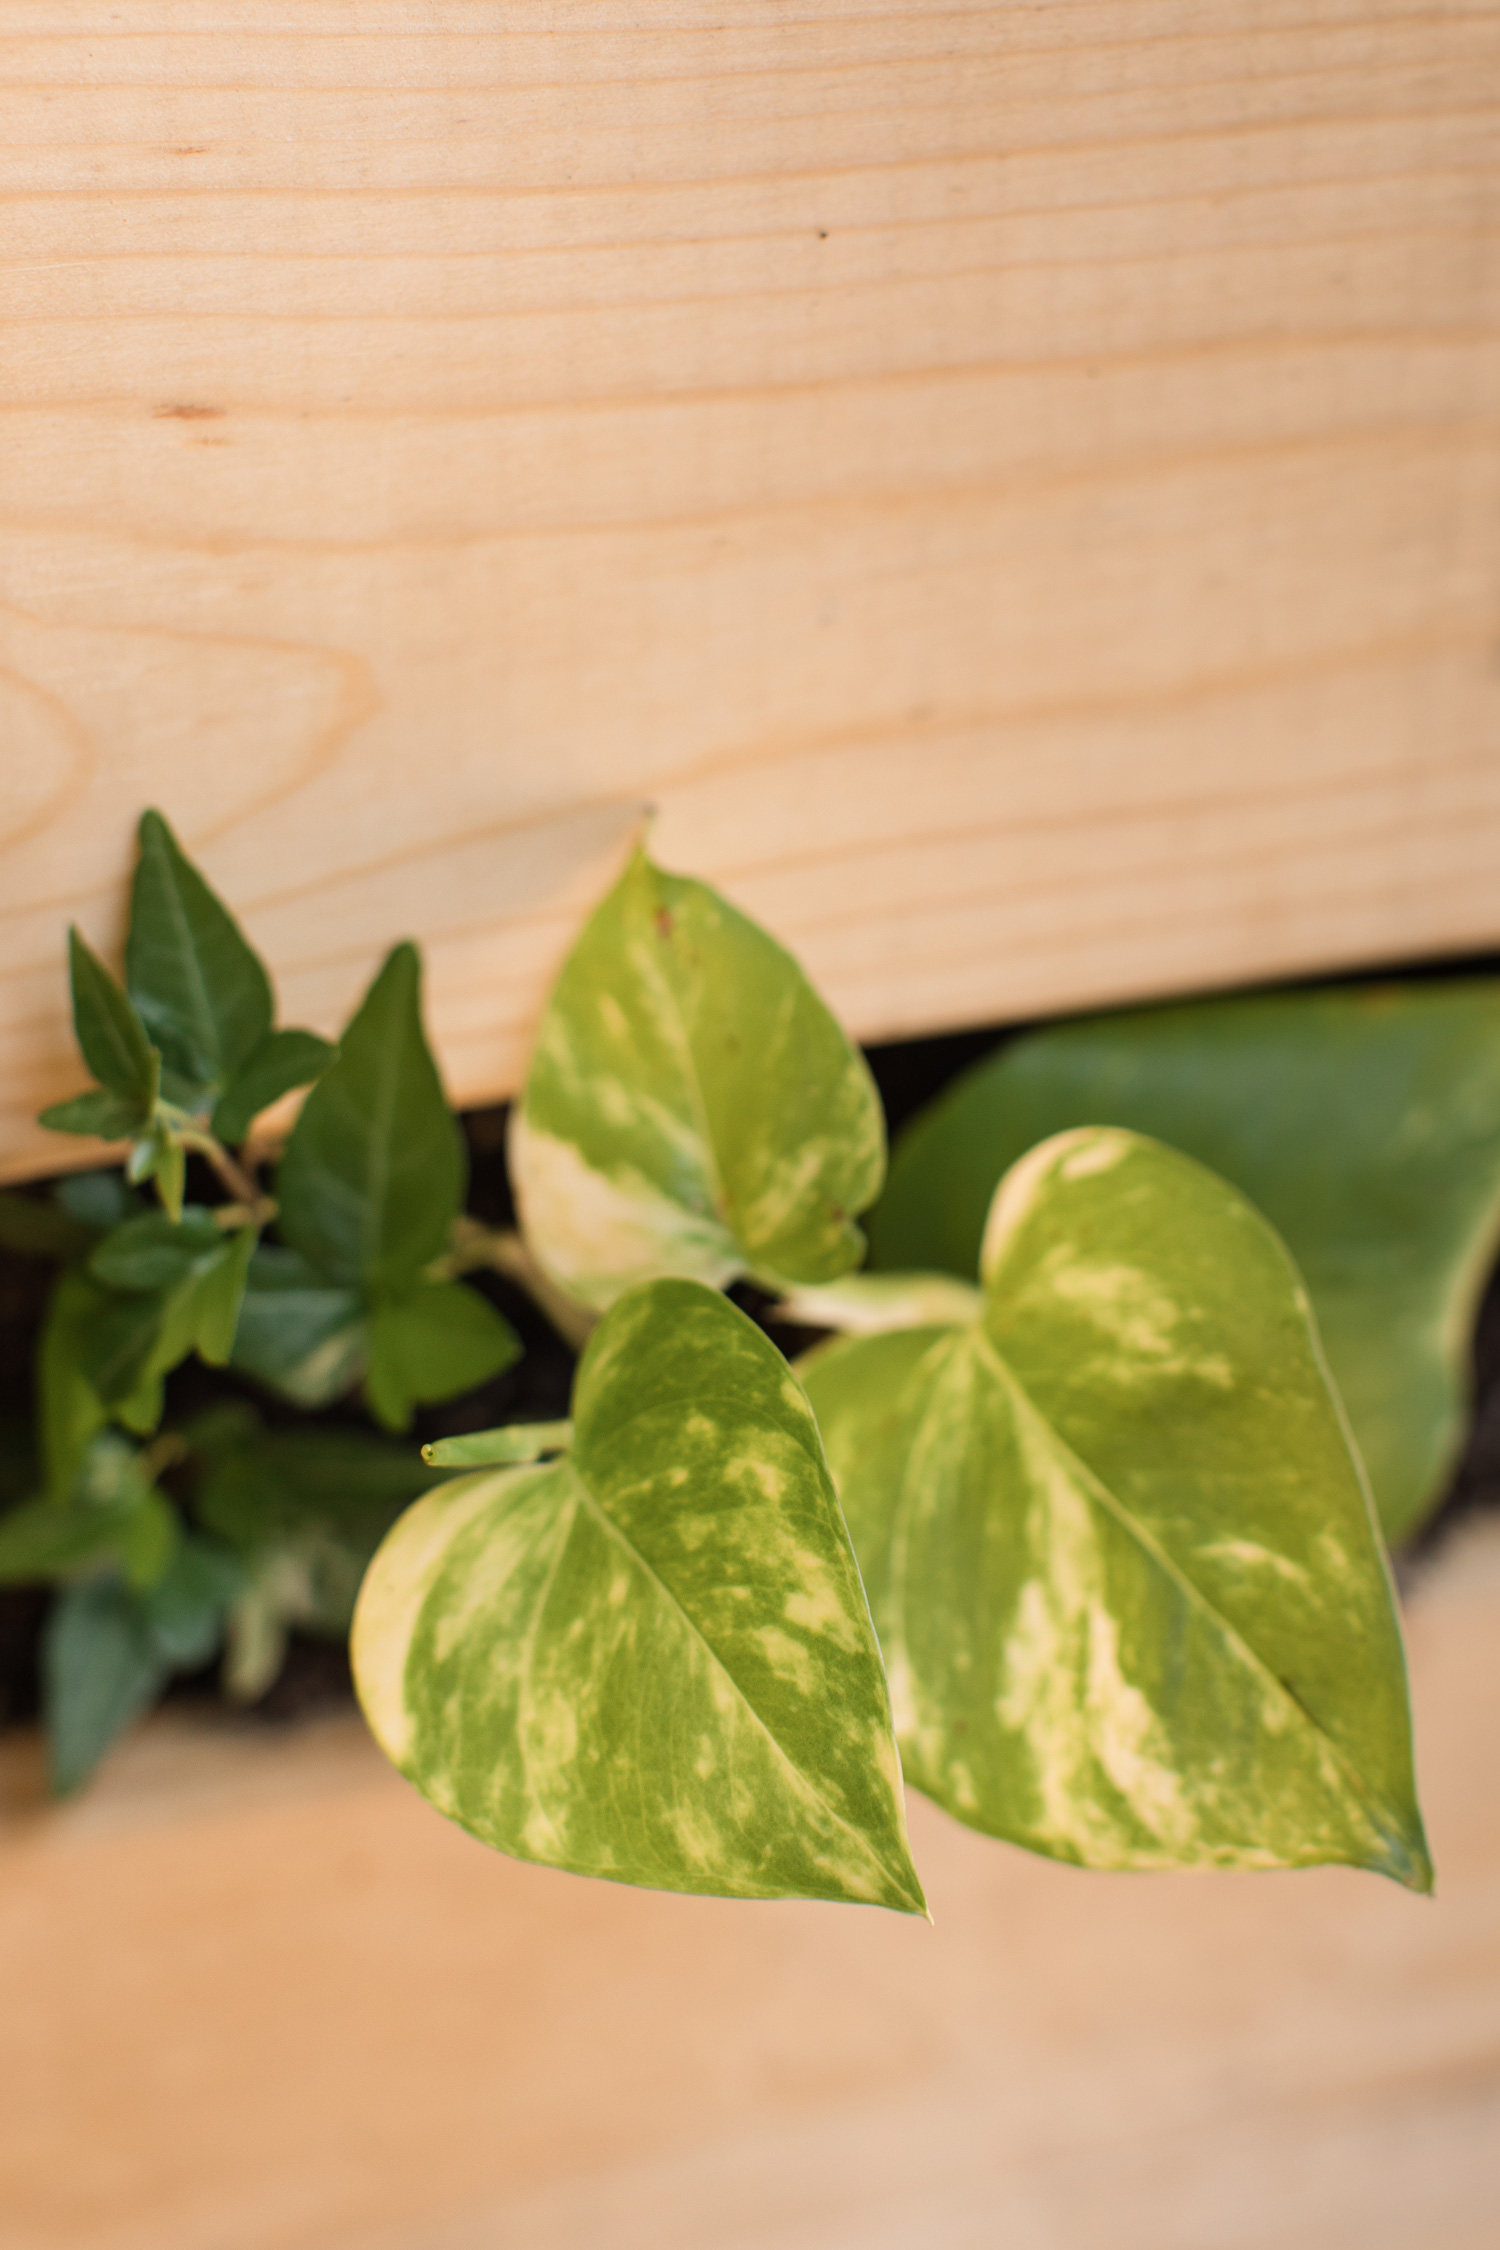 Lush green plants. English Ivy & pothos in a wooden box.